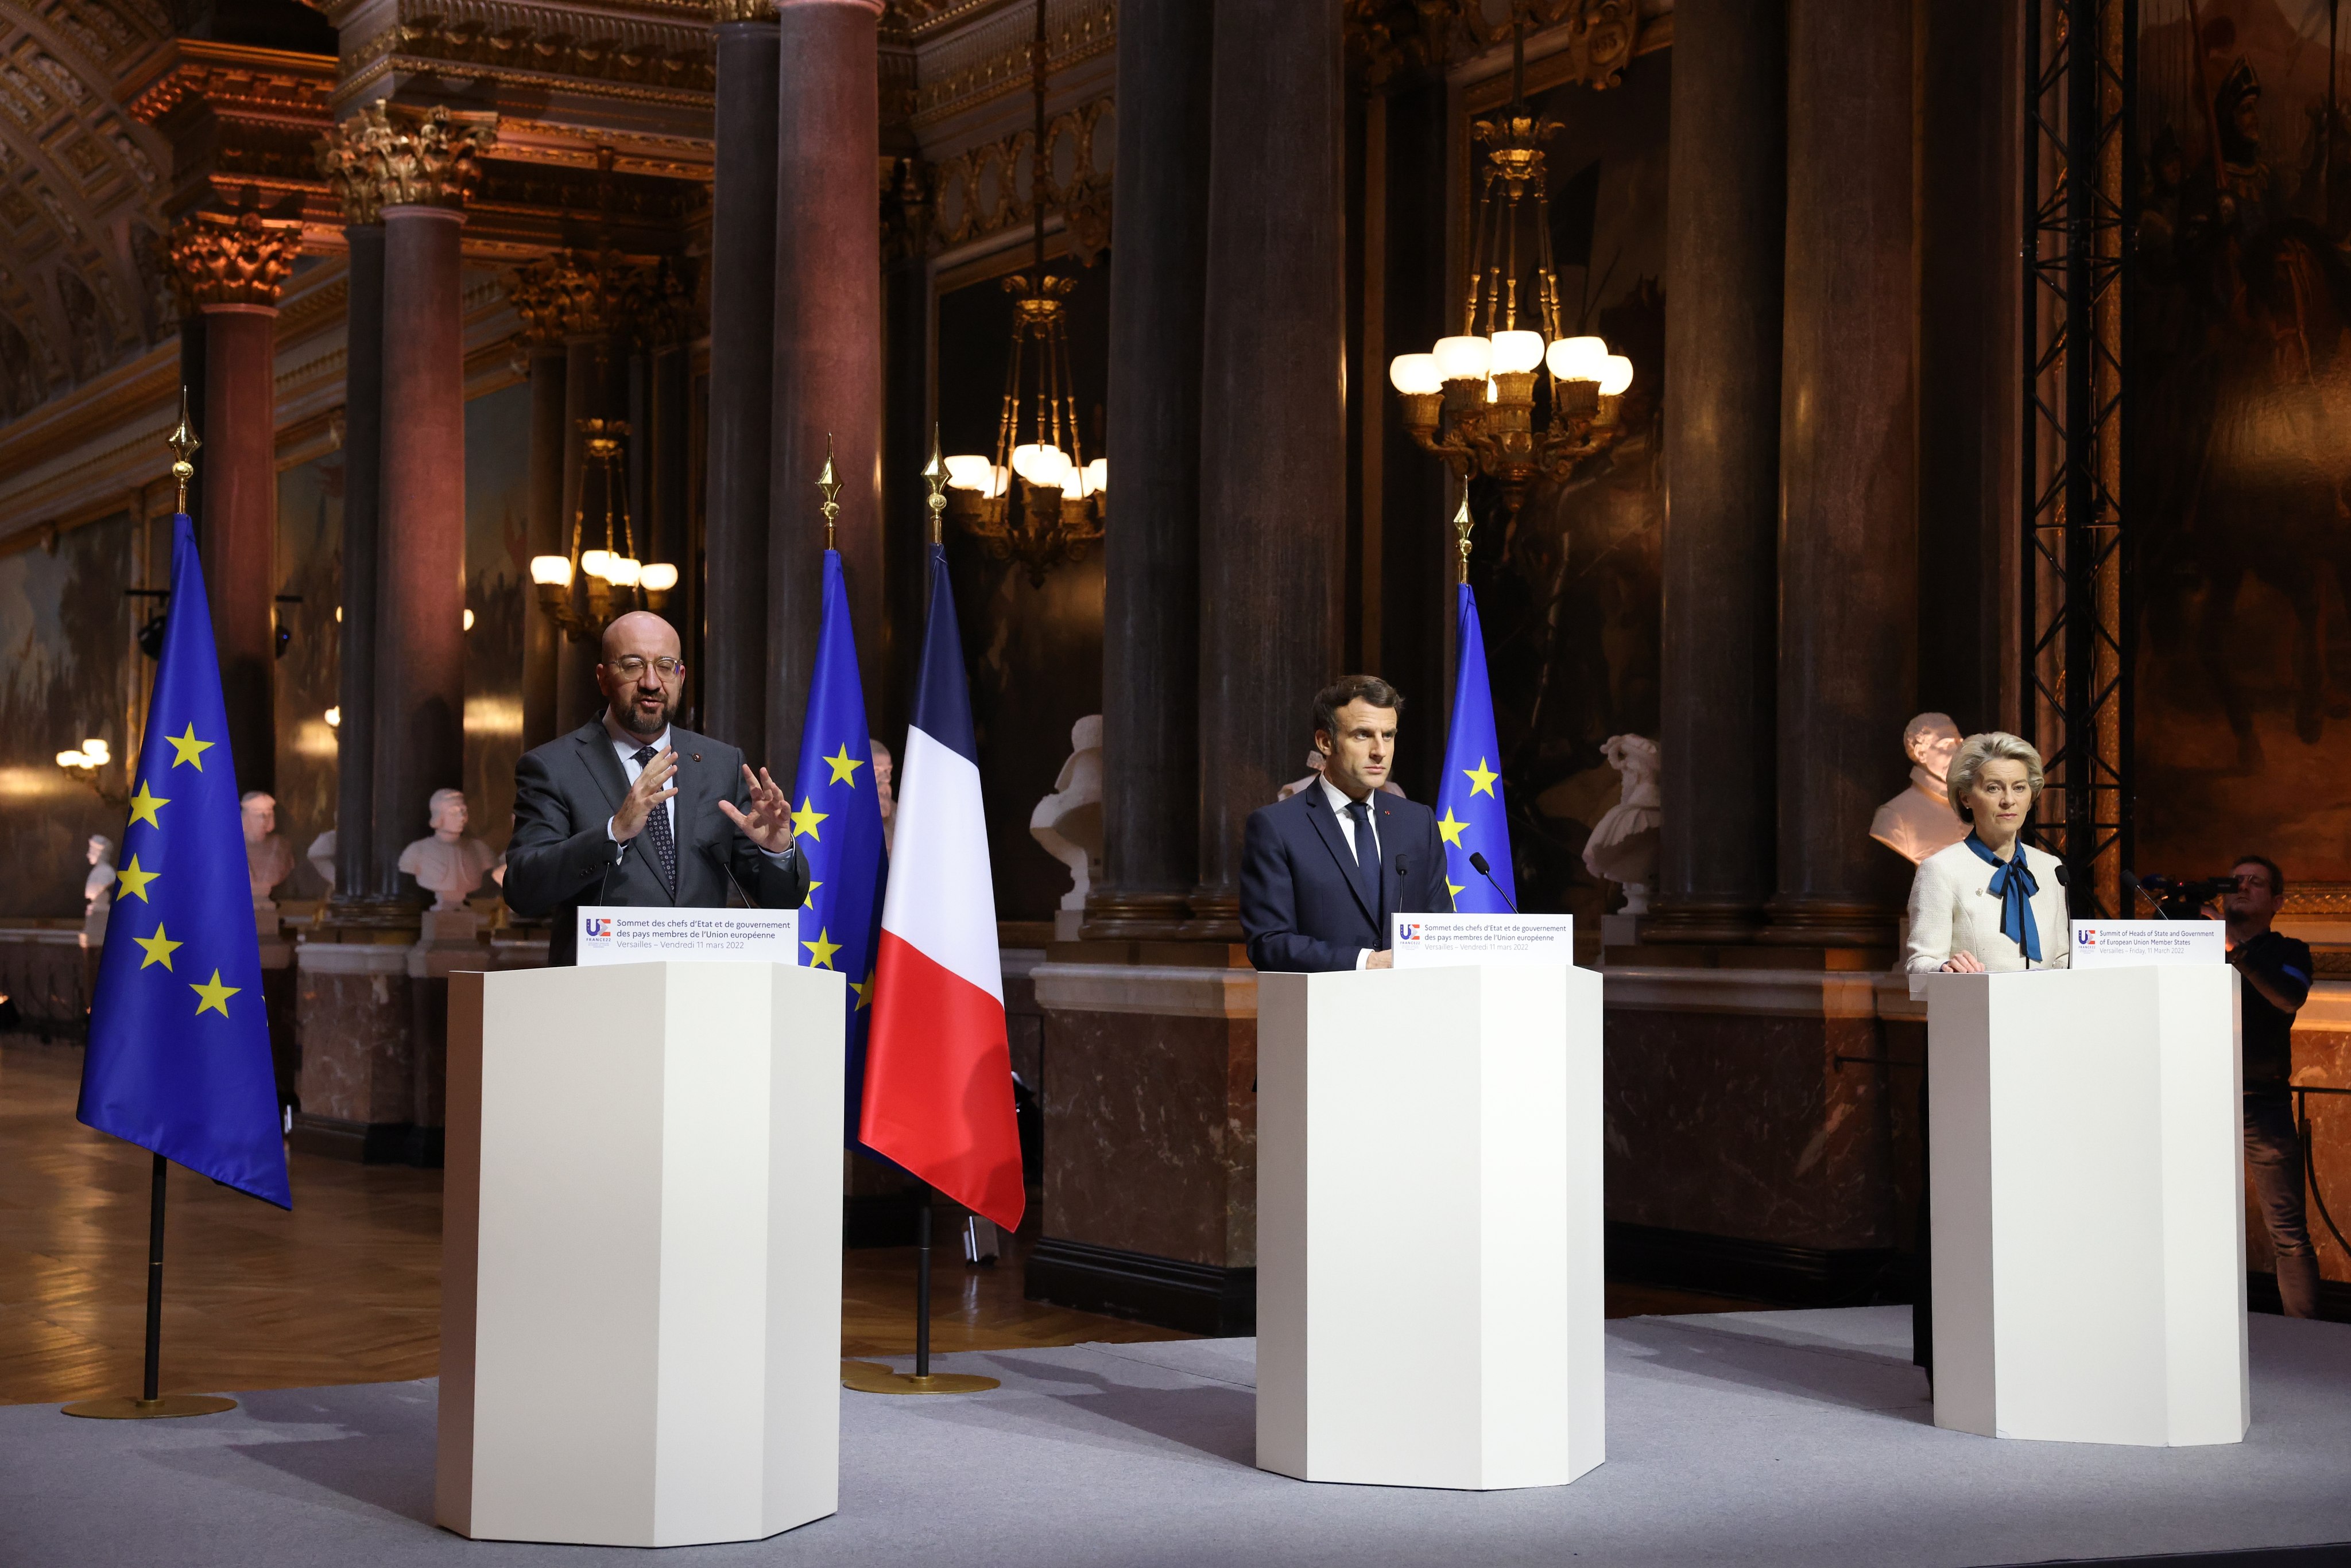 From the left, European Council President Charles Michel, French President Emmanuel Macron and European Commission President Ursula Von der Leyen attend a press conference at the Palace of Versailles in France after the meeting of EU leaders to discuss Russia’s invasion of Ukraine, on March 11. Photo: Dario Pignatelli/EU Council/DPA